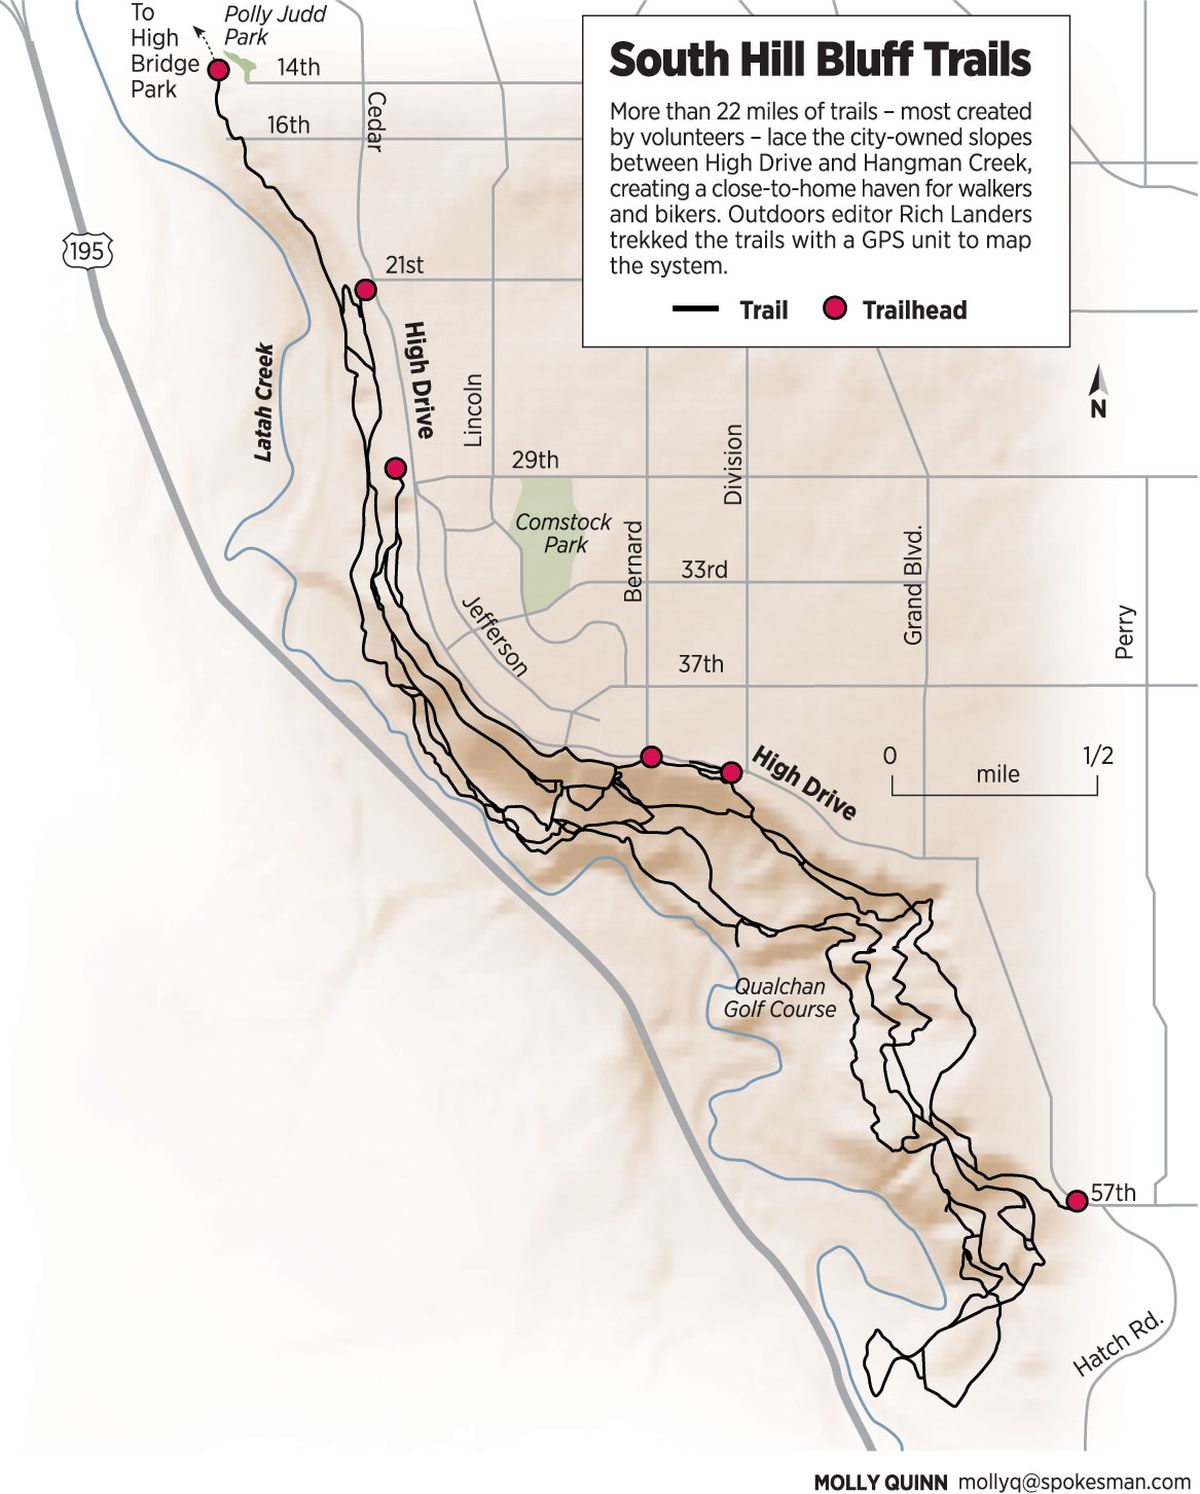 South Hill Bluff Trails map